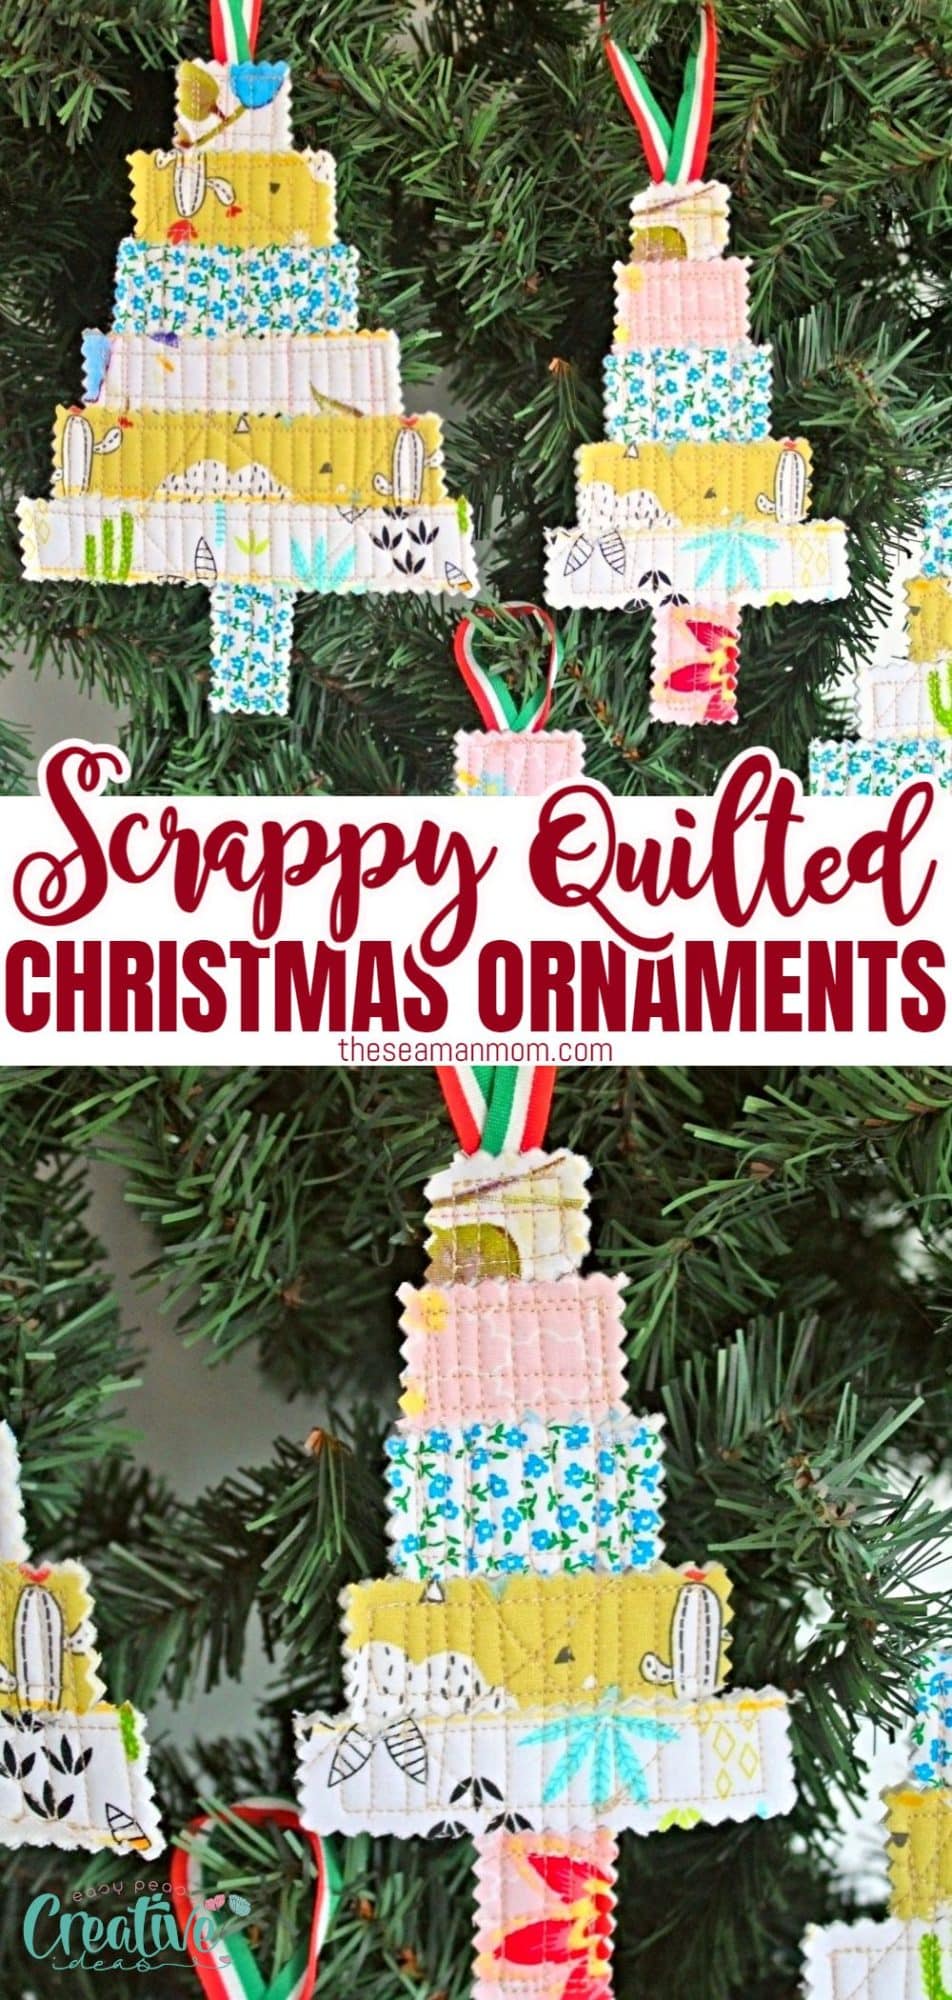 Quilted Christmas ornaments hanging in a Christmas tree